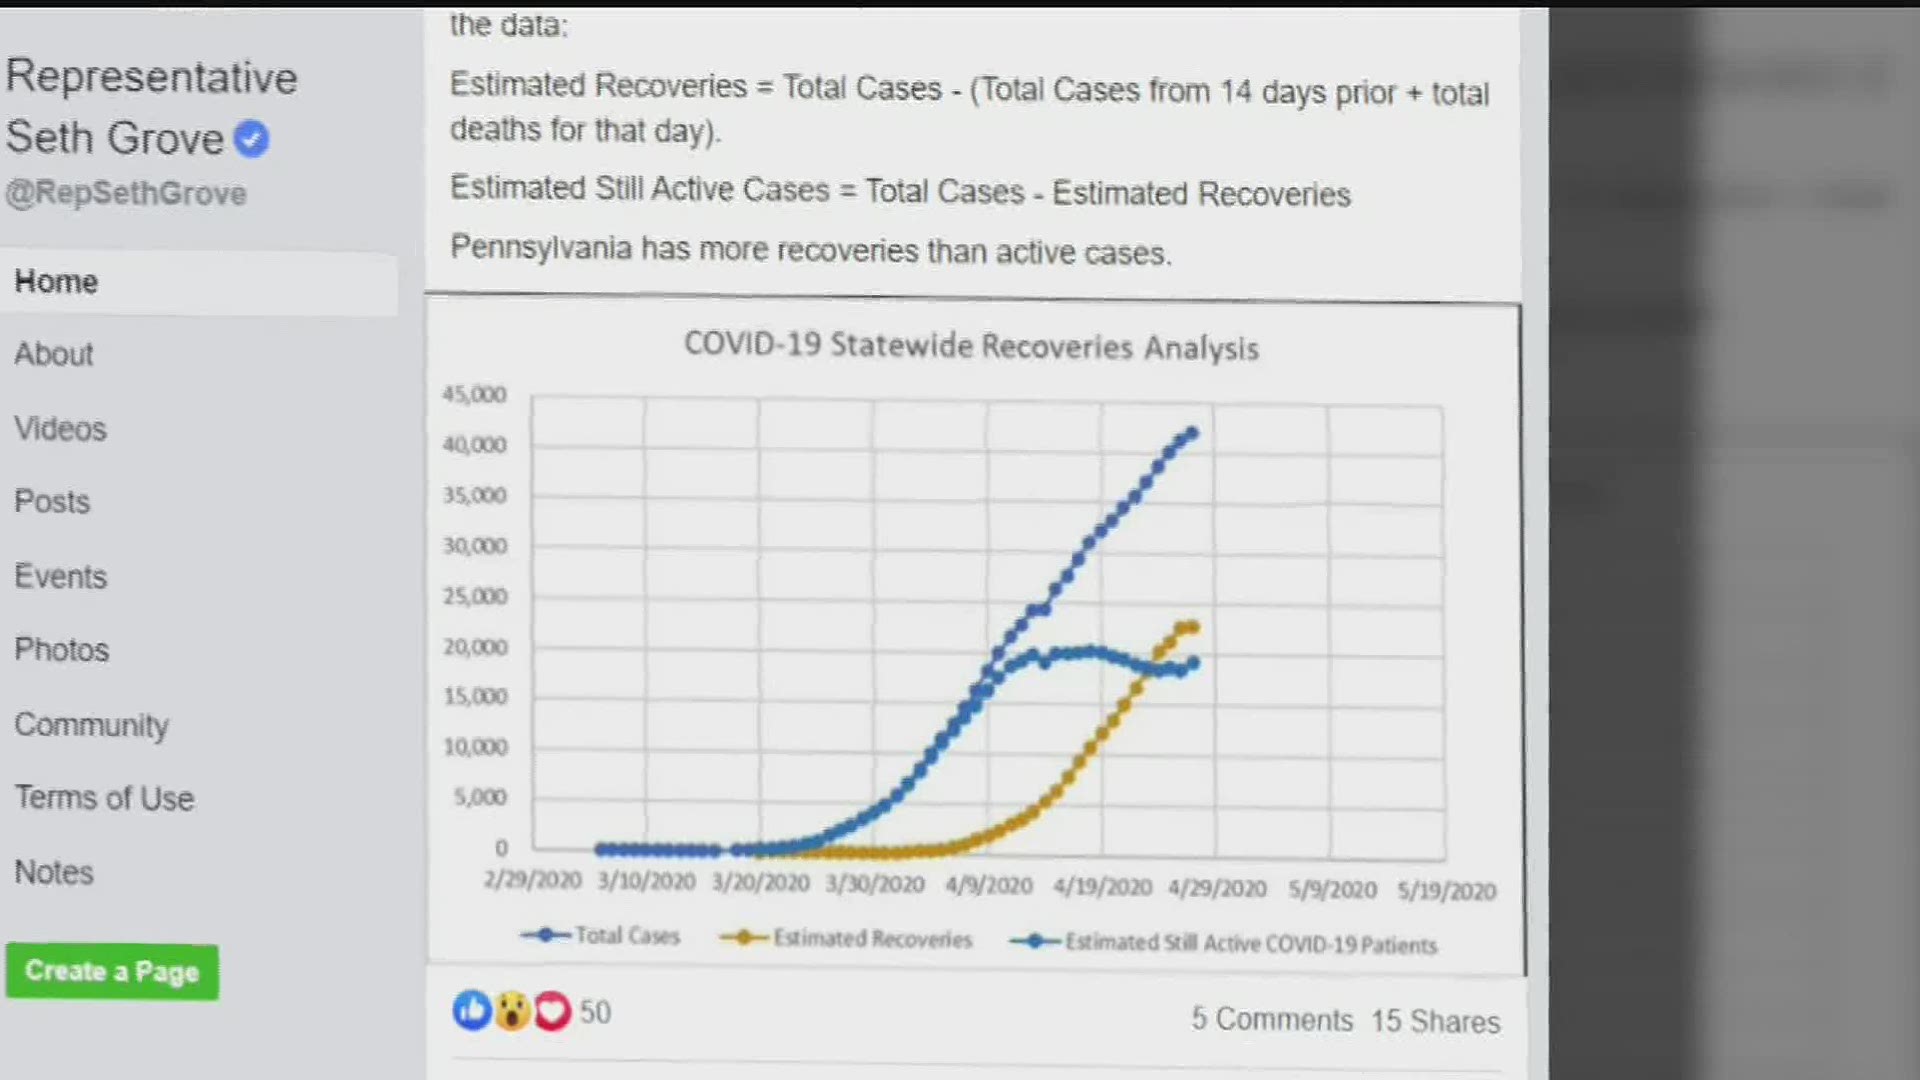 There has been no official COVID-19 recovery numbers released in PA. Can we just do the math to find the numbers? We verify.